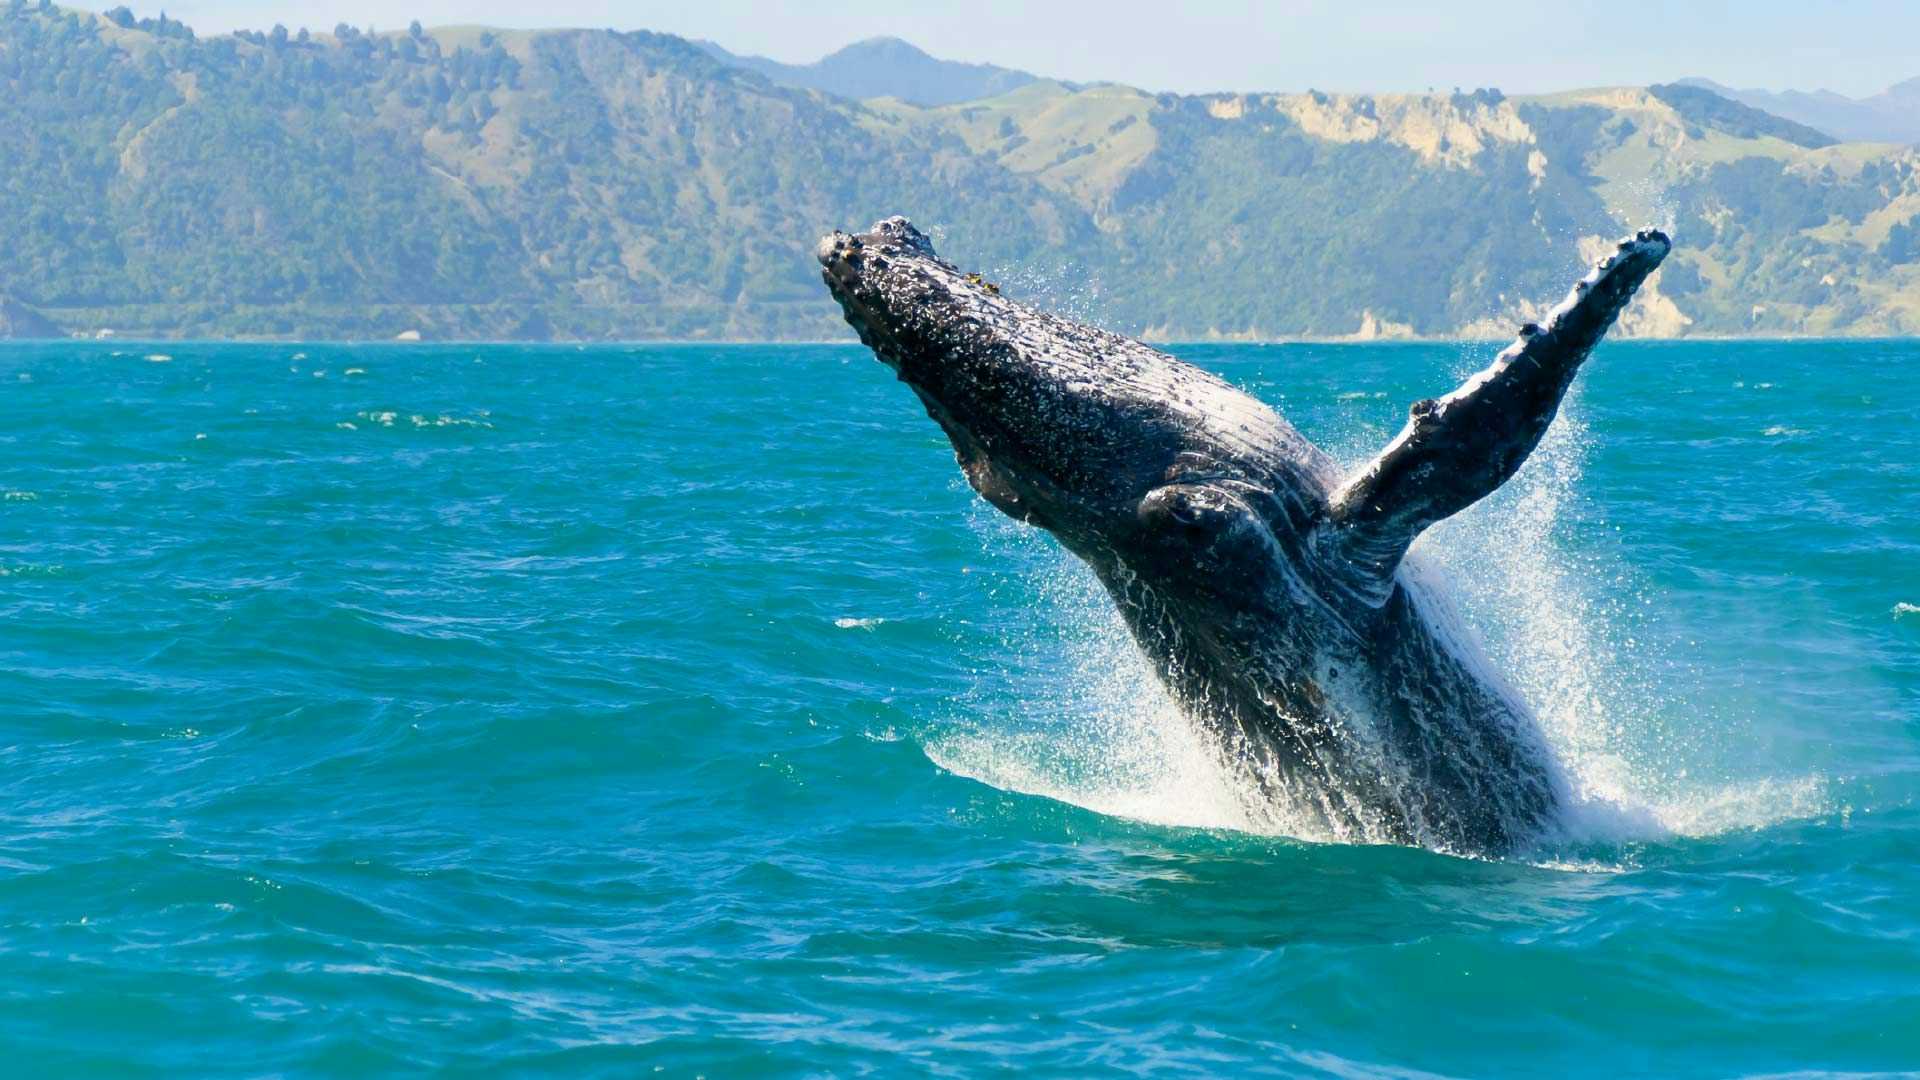 Whale breaching the surface in Kaikoura